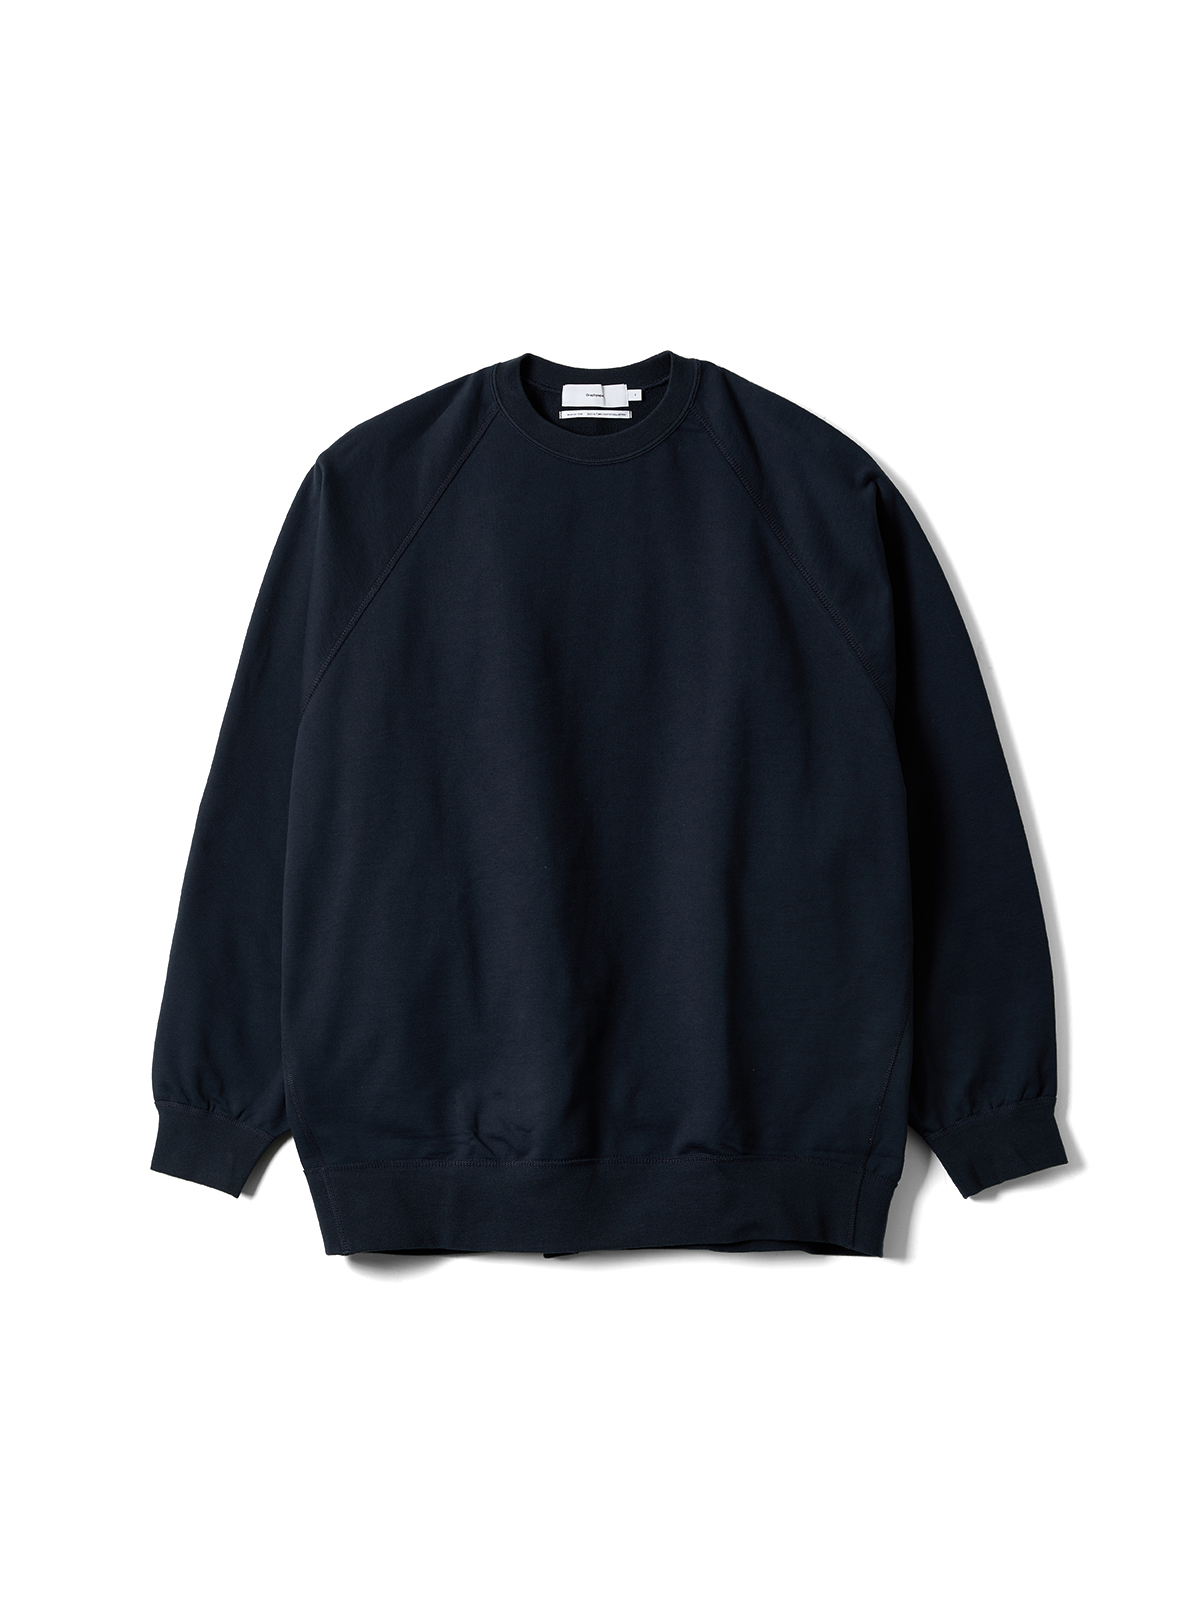 ULTRA COMPACT TERRY CREW NECK SWEATER (NAVY)